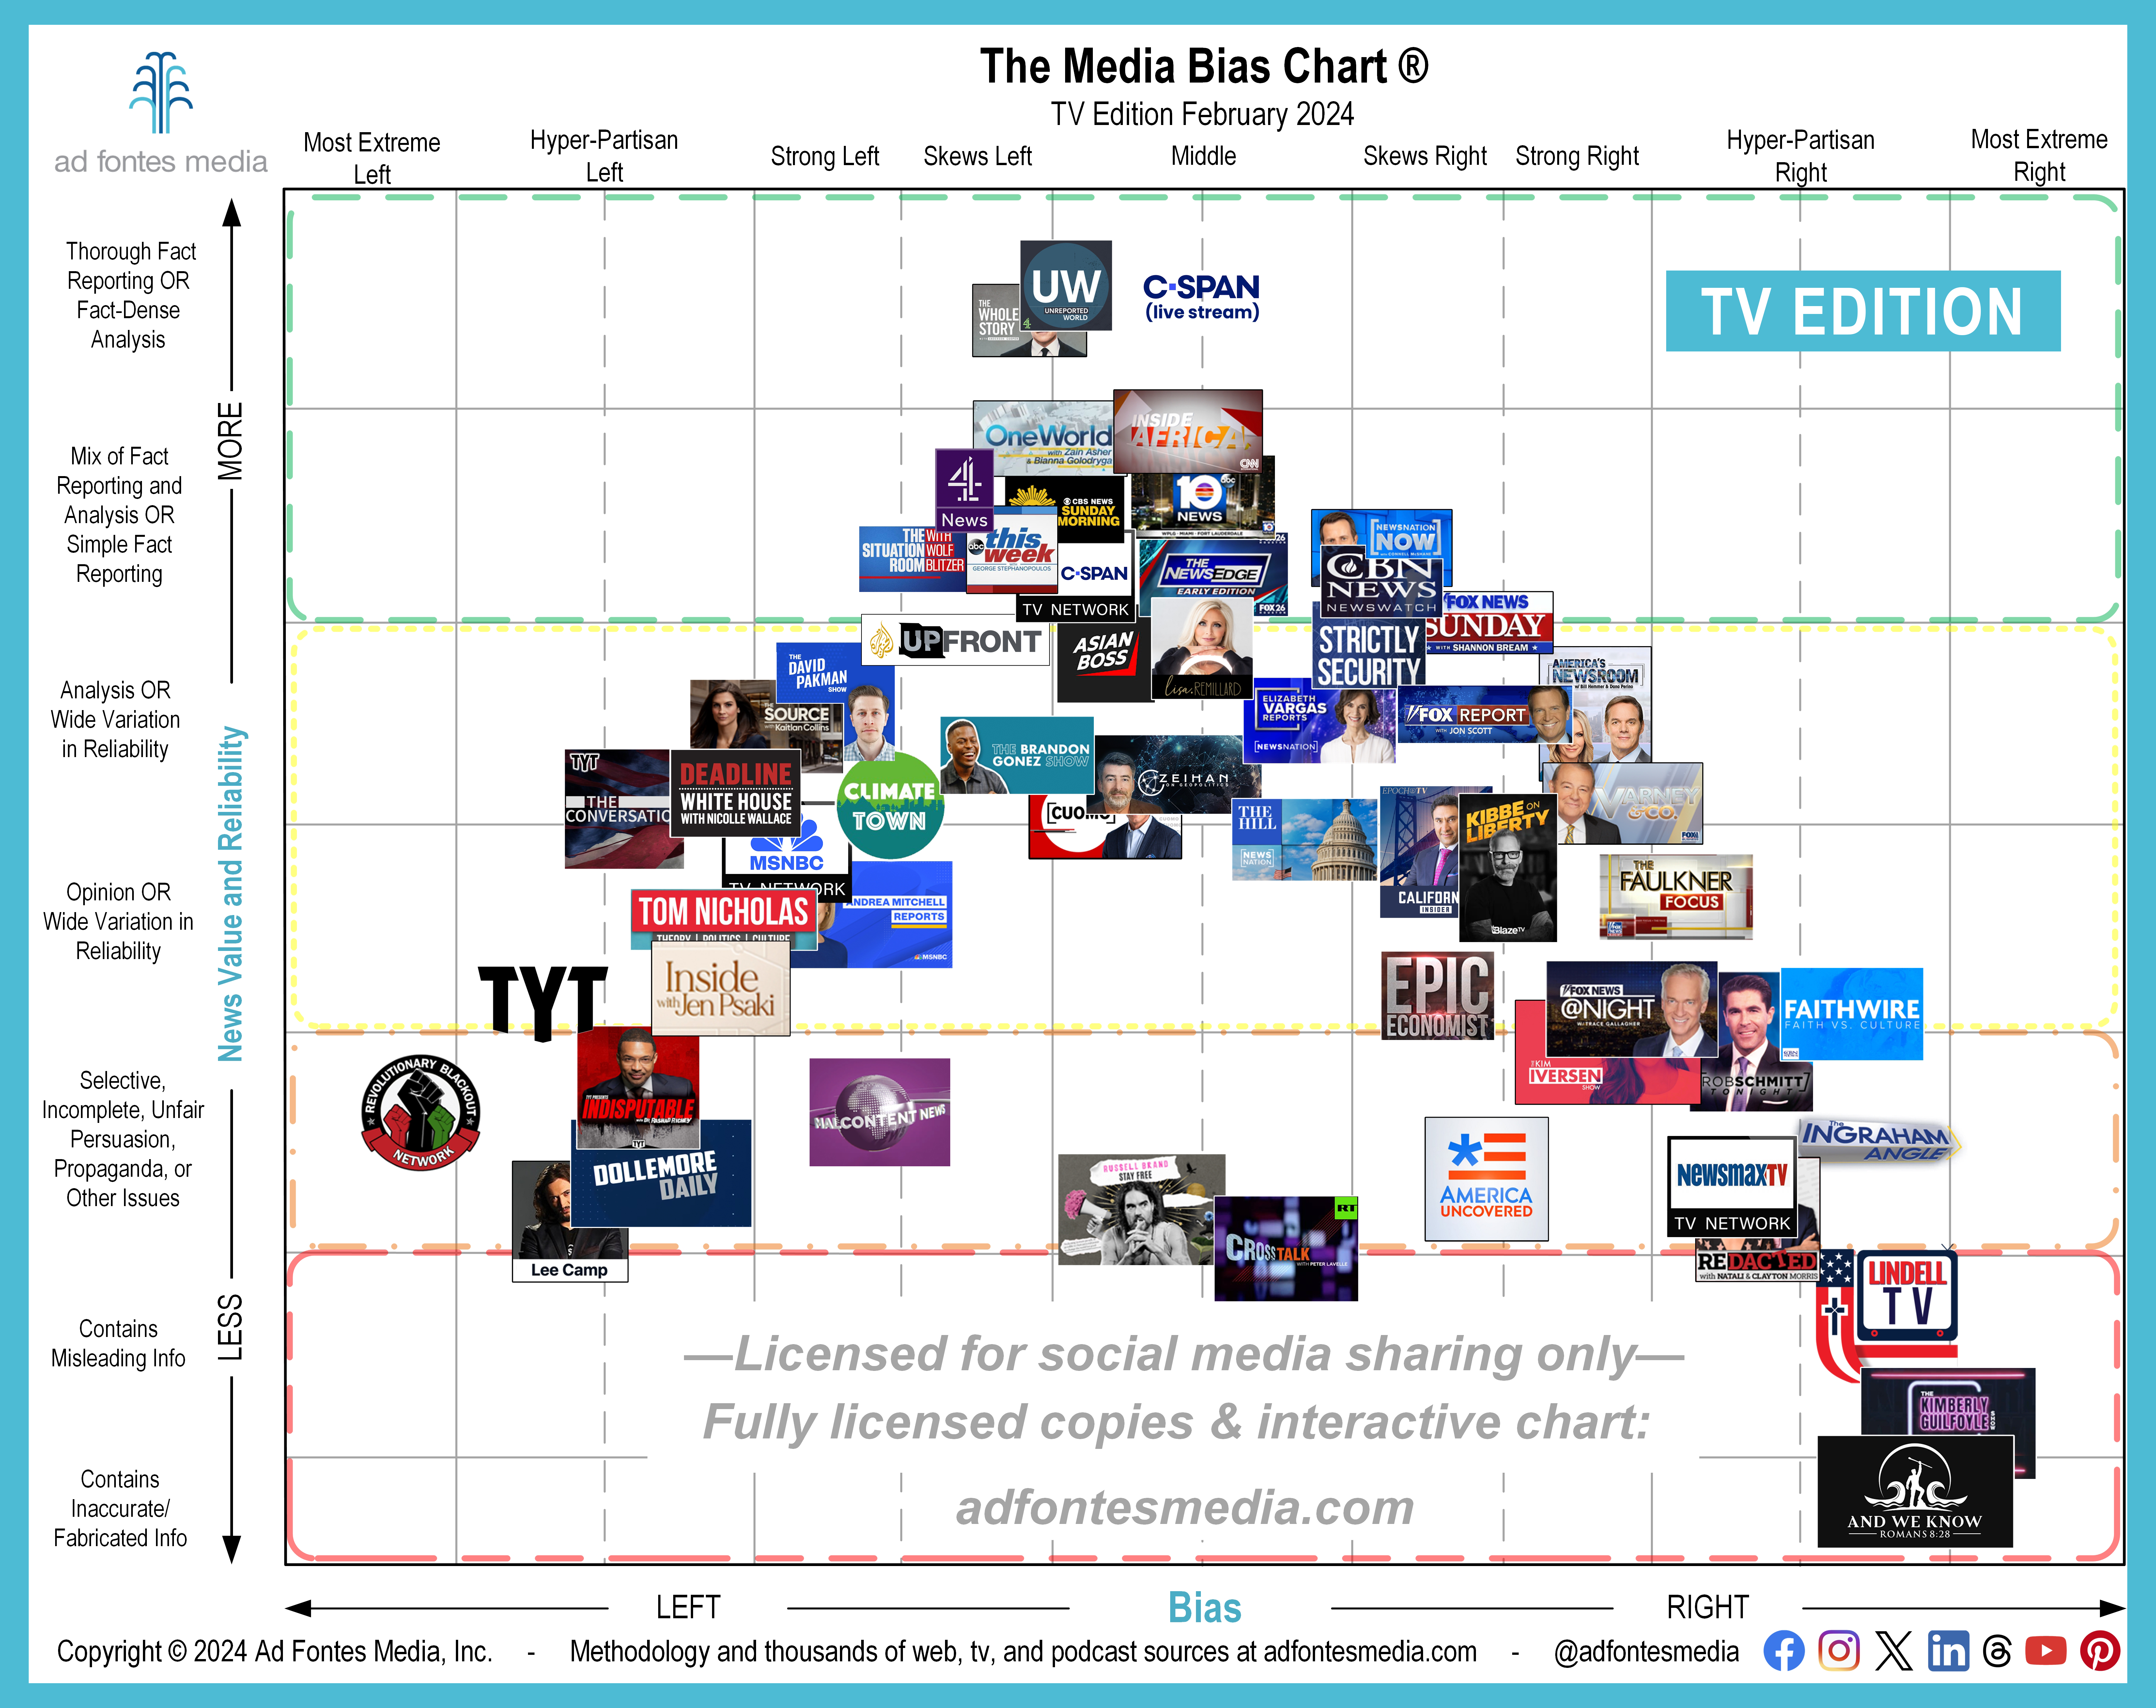 Explore 59 TV/Video Shows on February Edition of Media Bias Chart